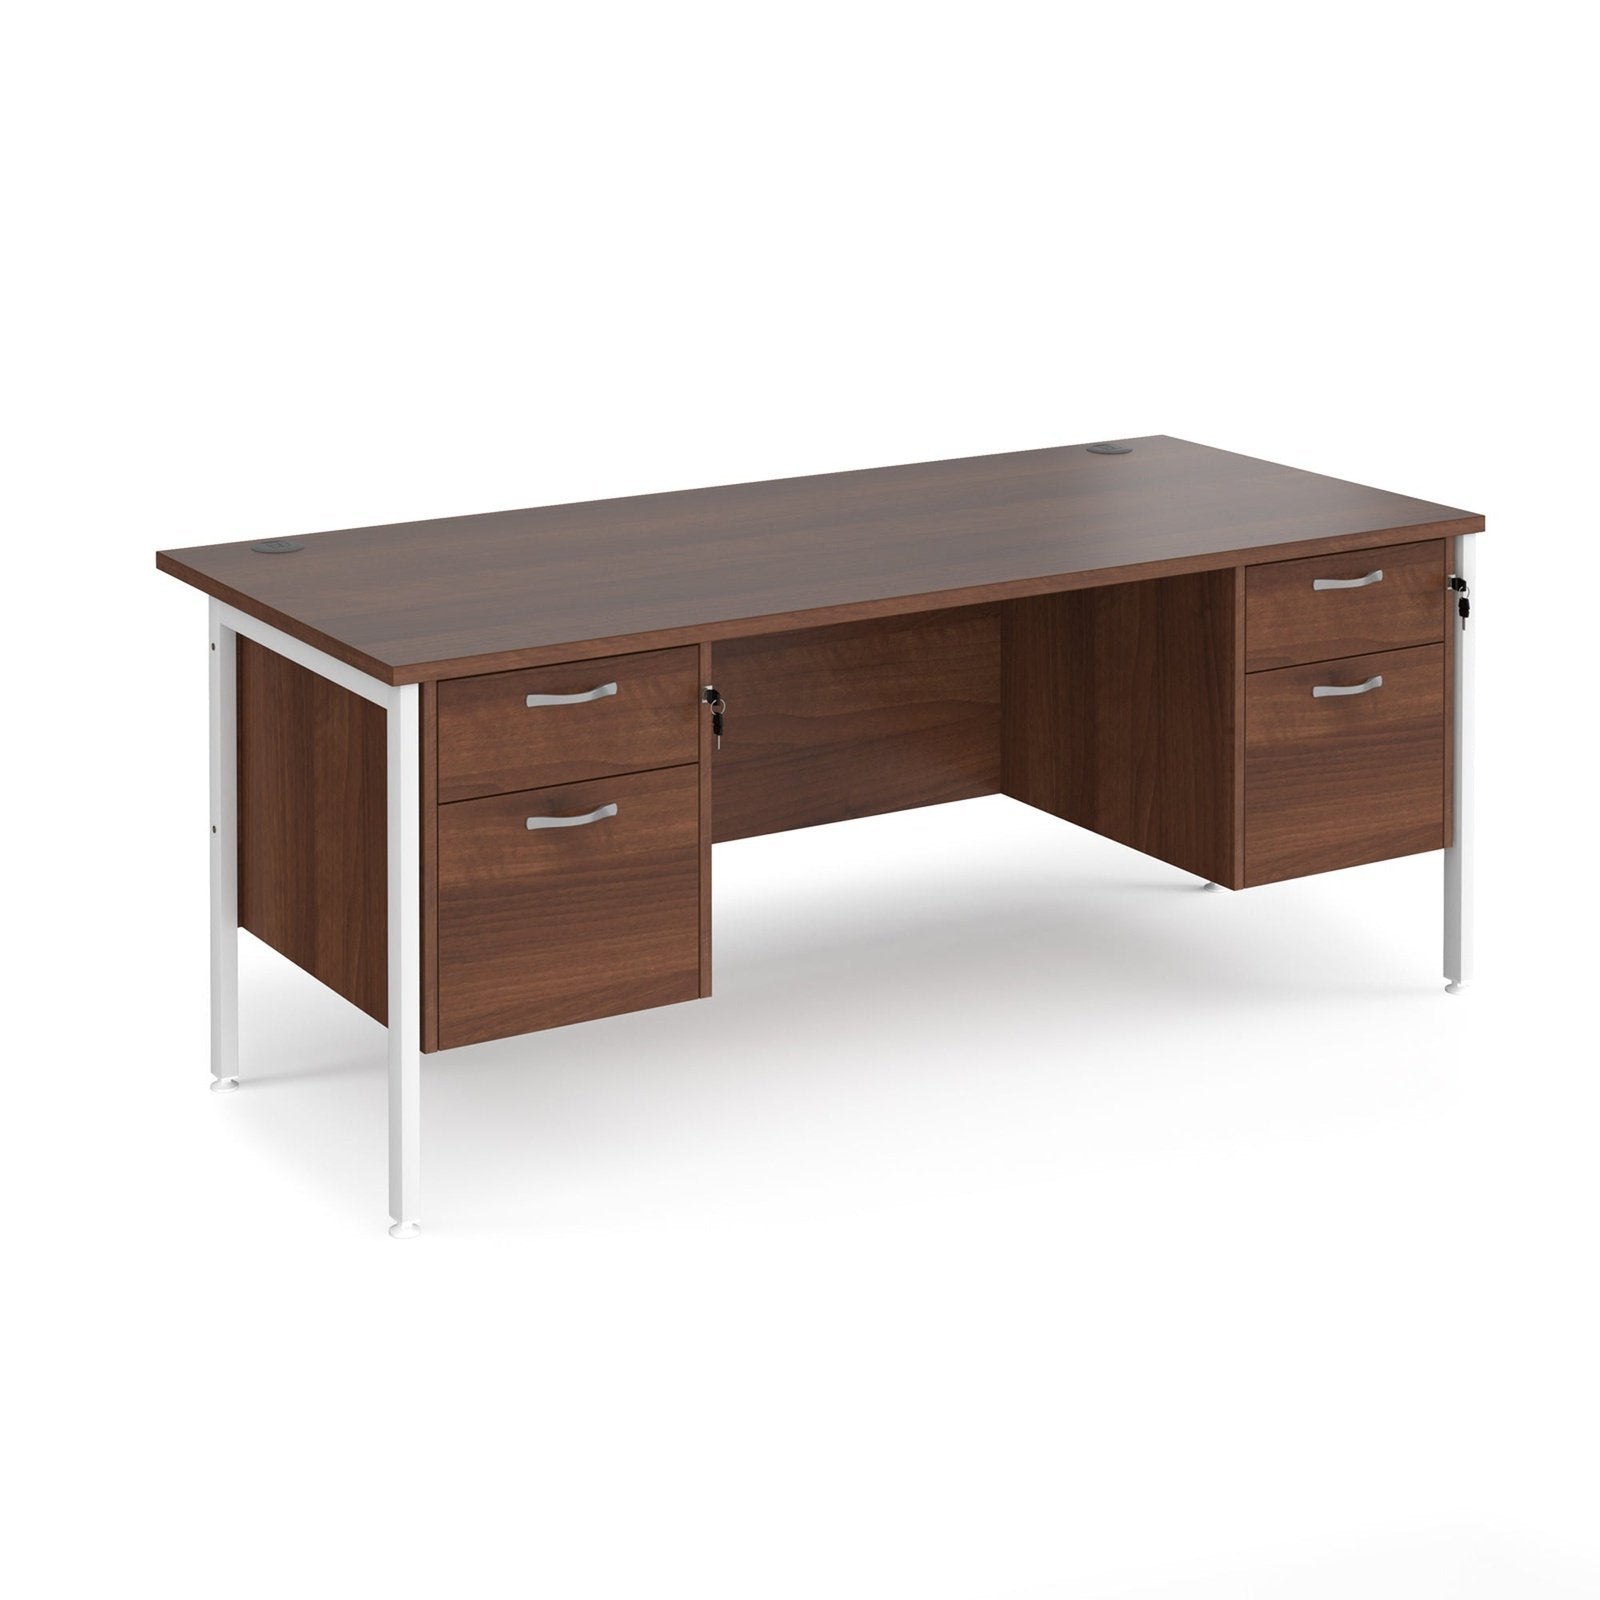 Maestro 25 H-Frame leg straight desk 800 deep with two x 2 drawer pedestals - Office Products Online